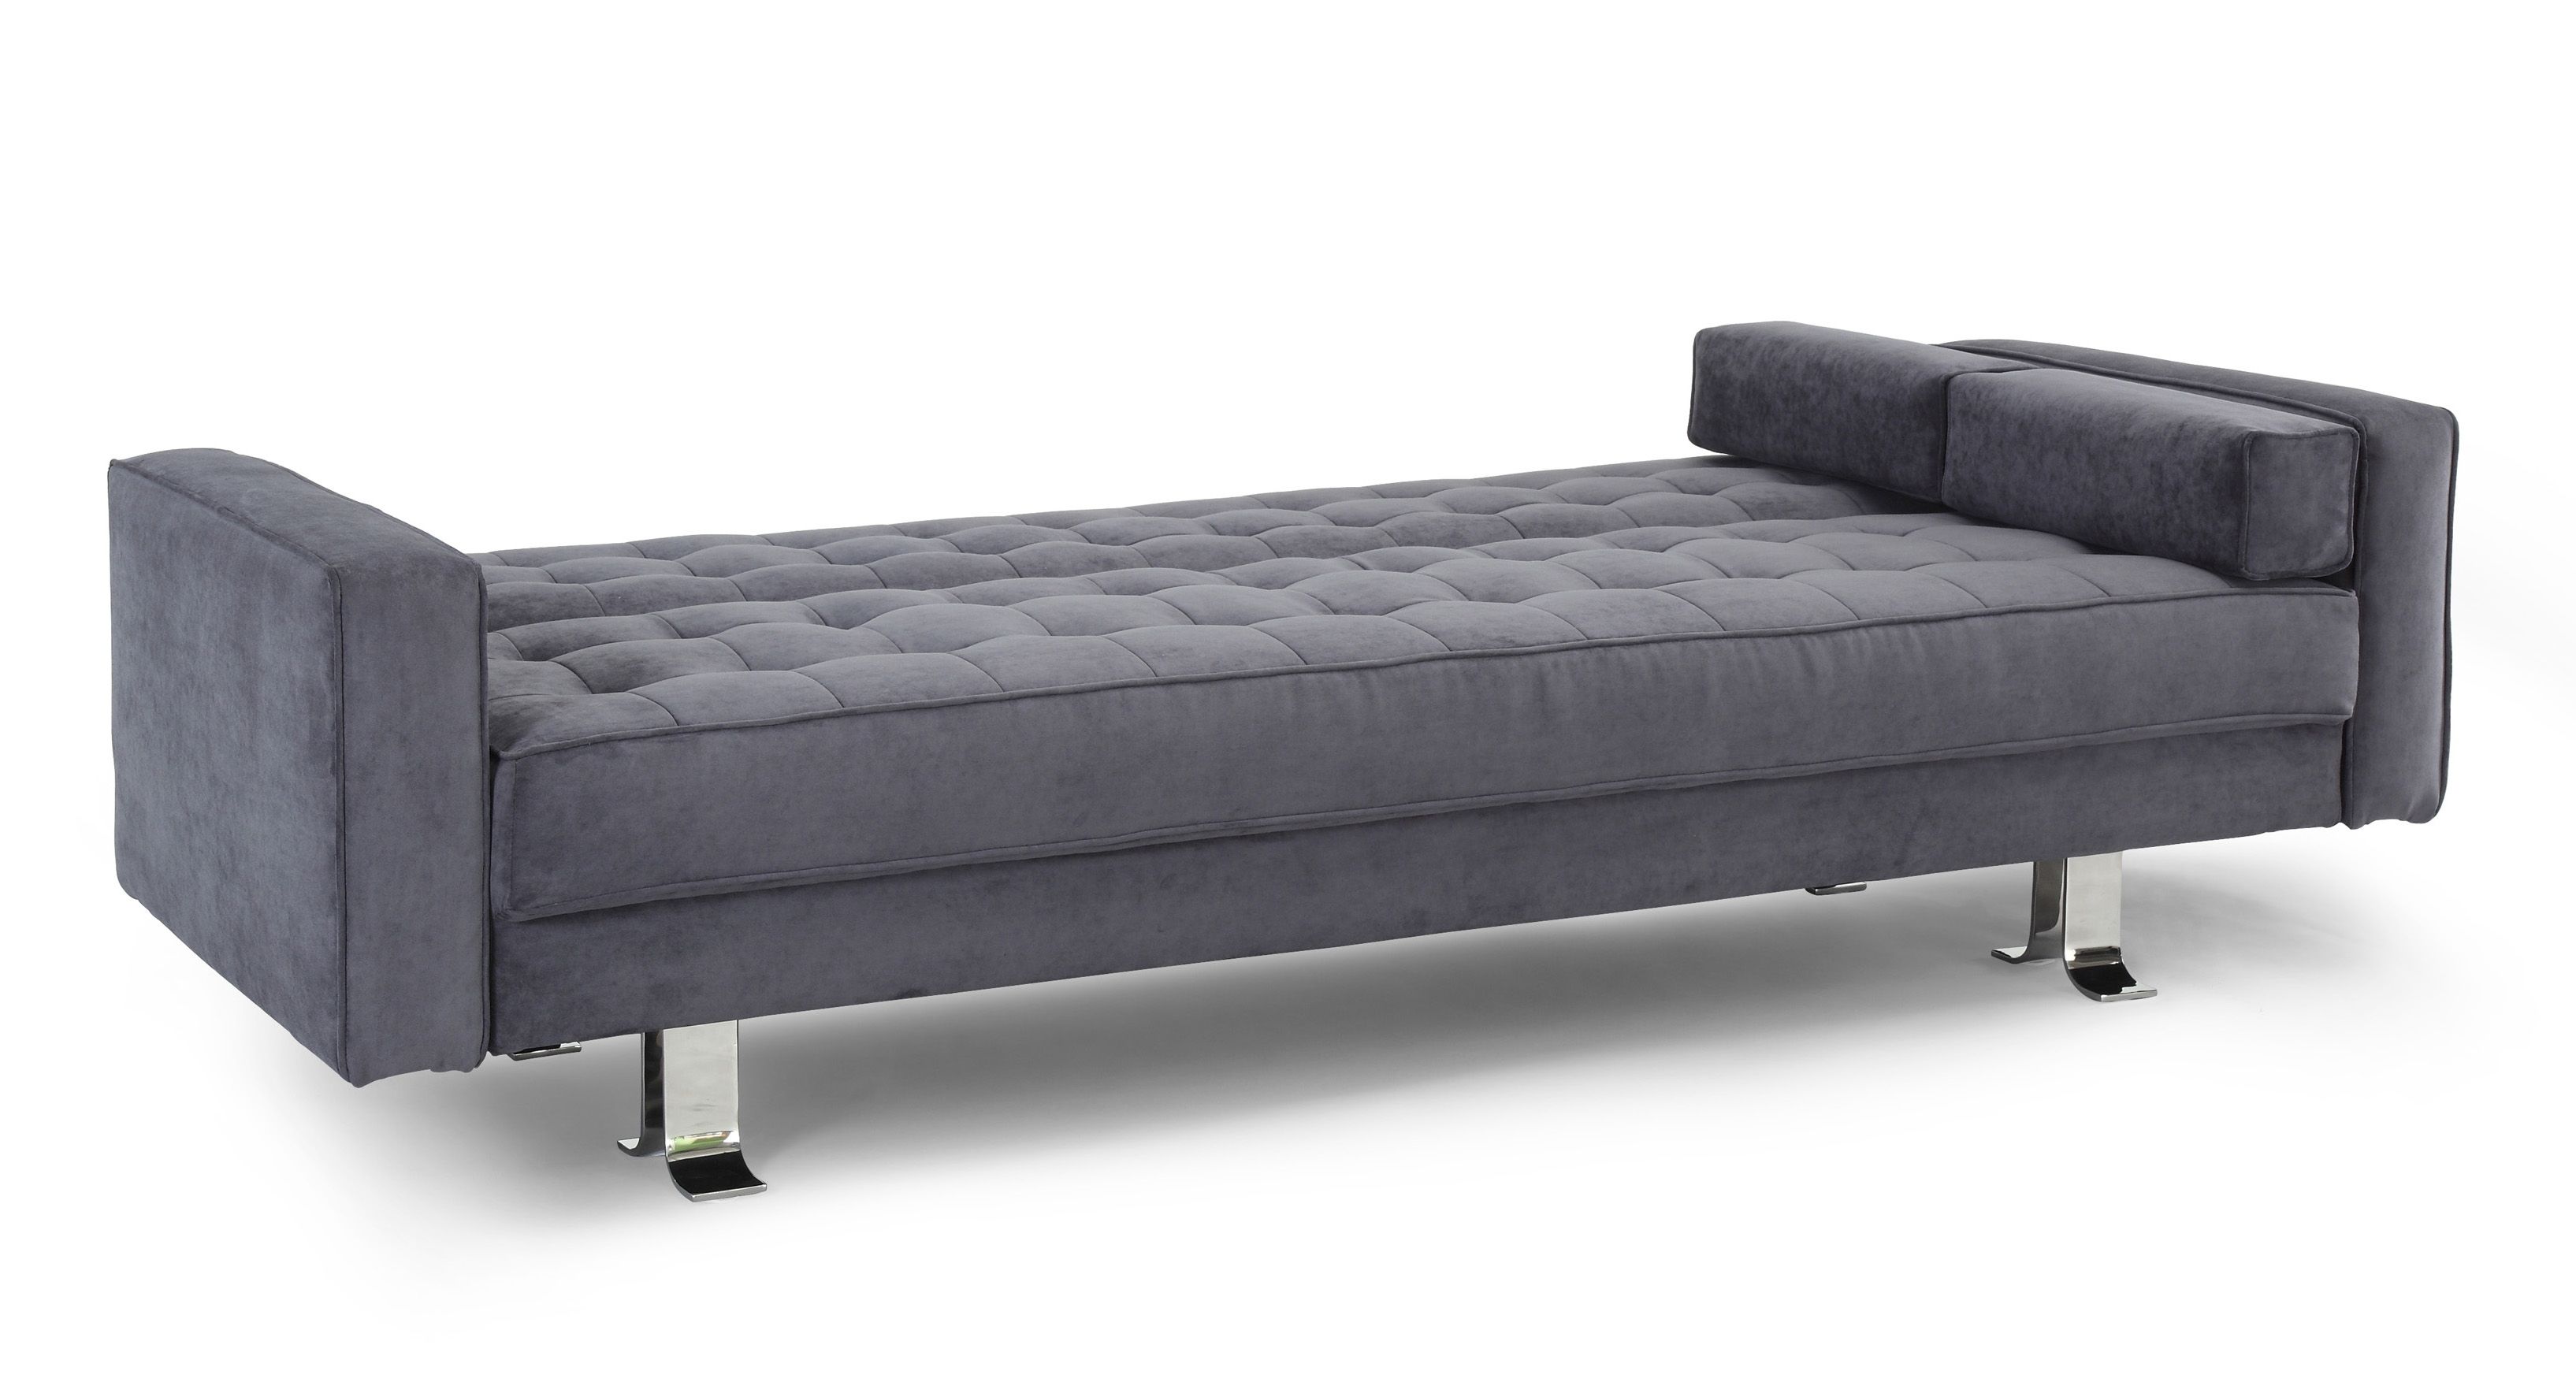 Lifestyle Solutions Rudolpho Convertible Sofa Ga Rup Cc Set With Regard To Convertible Sofas (View 3 of 10)